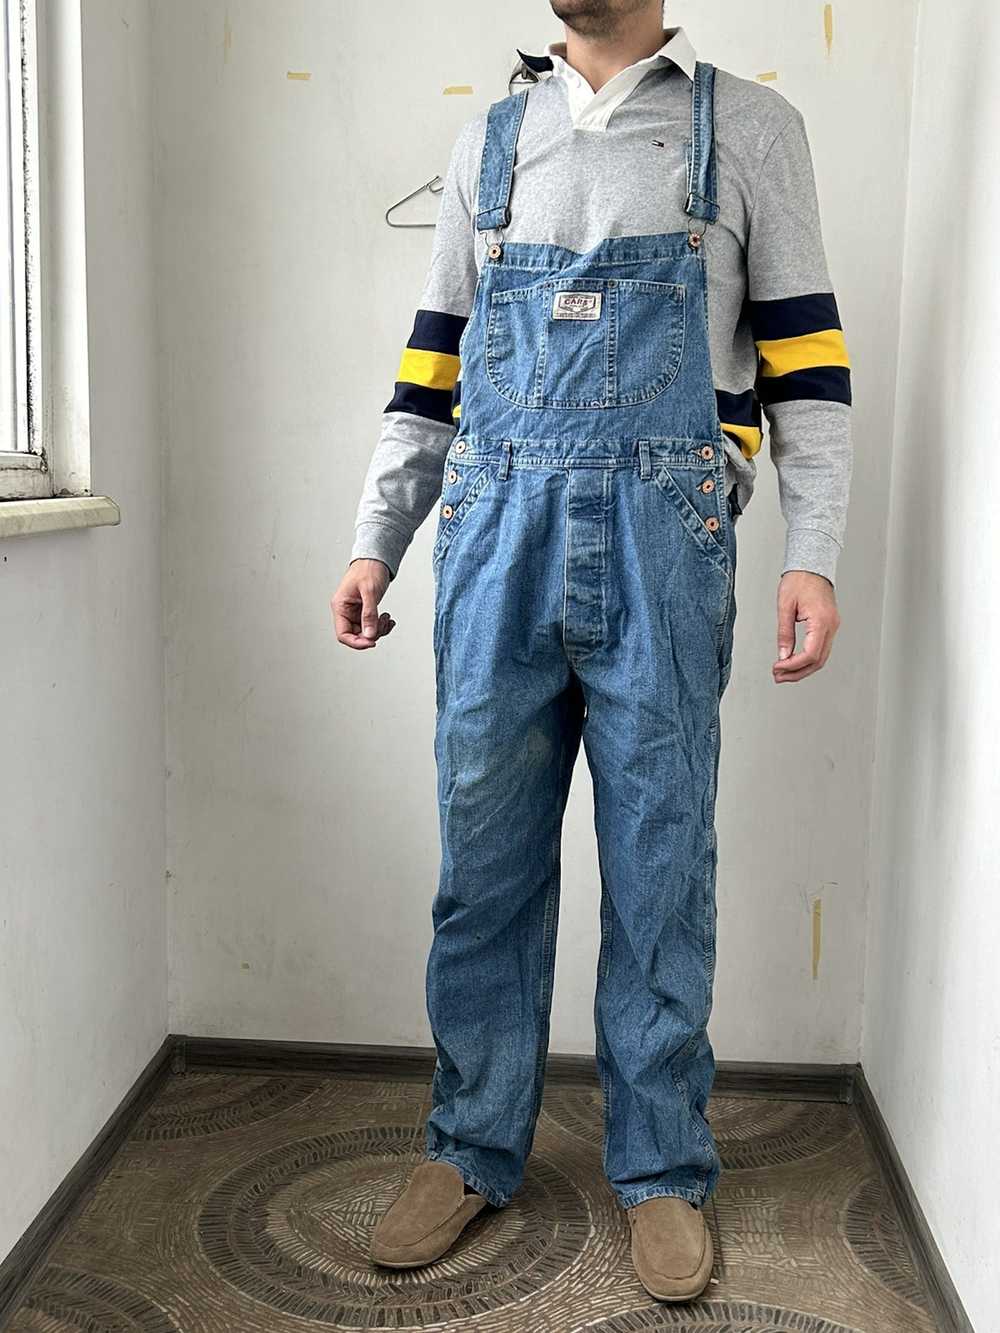 Japanese Brand × Overalls × Workers Cars overall - image 1